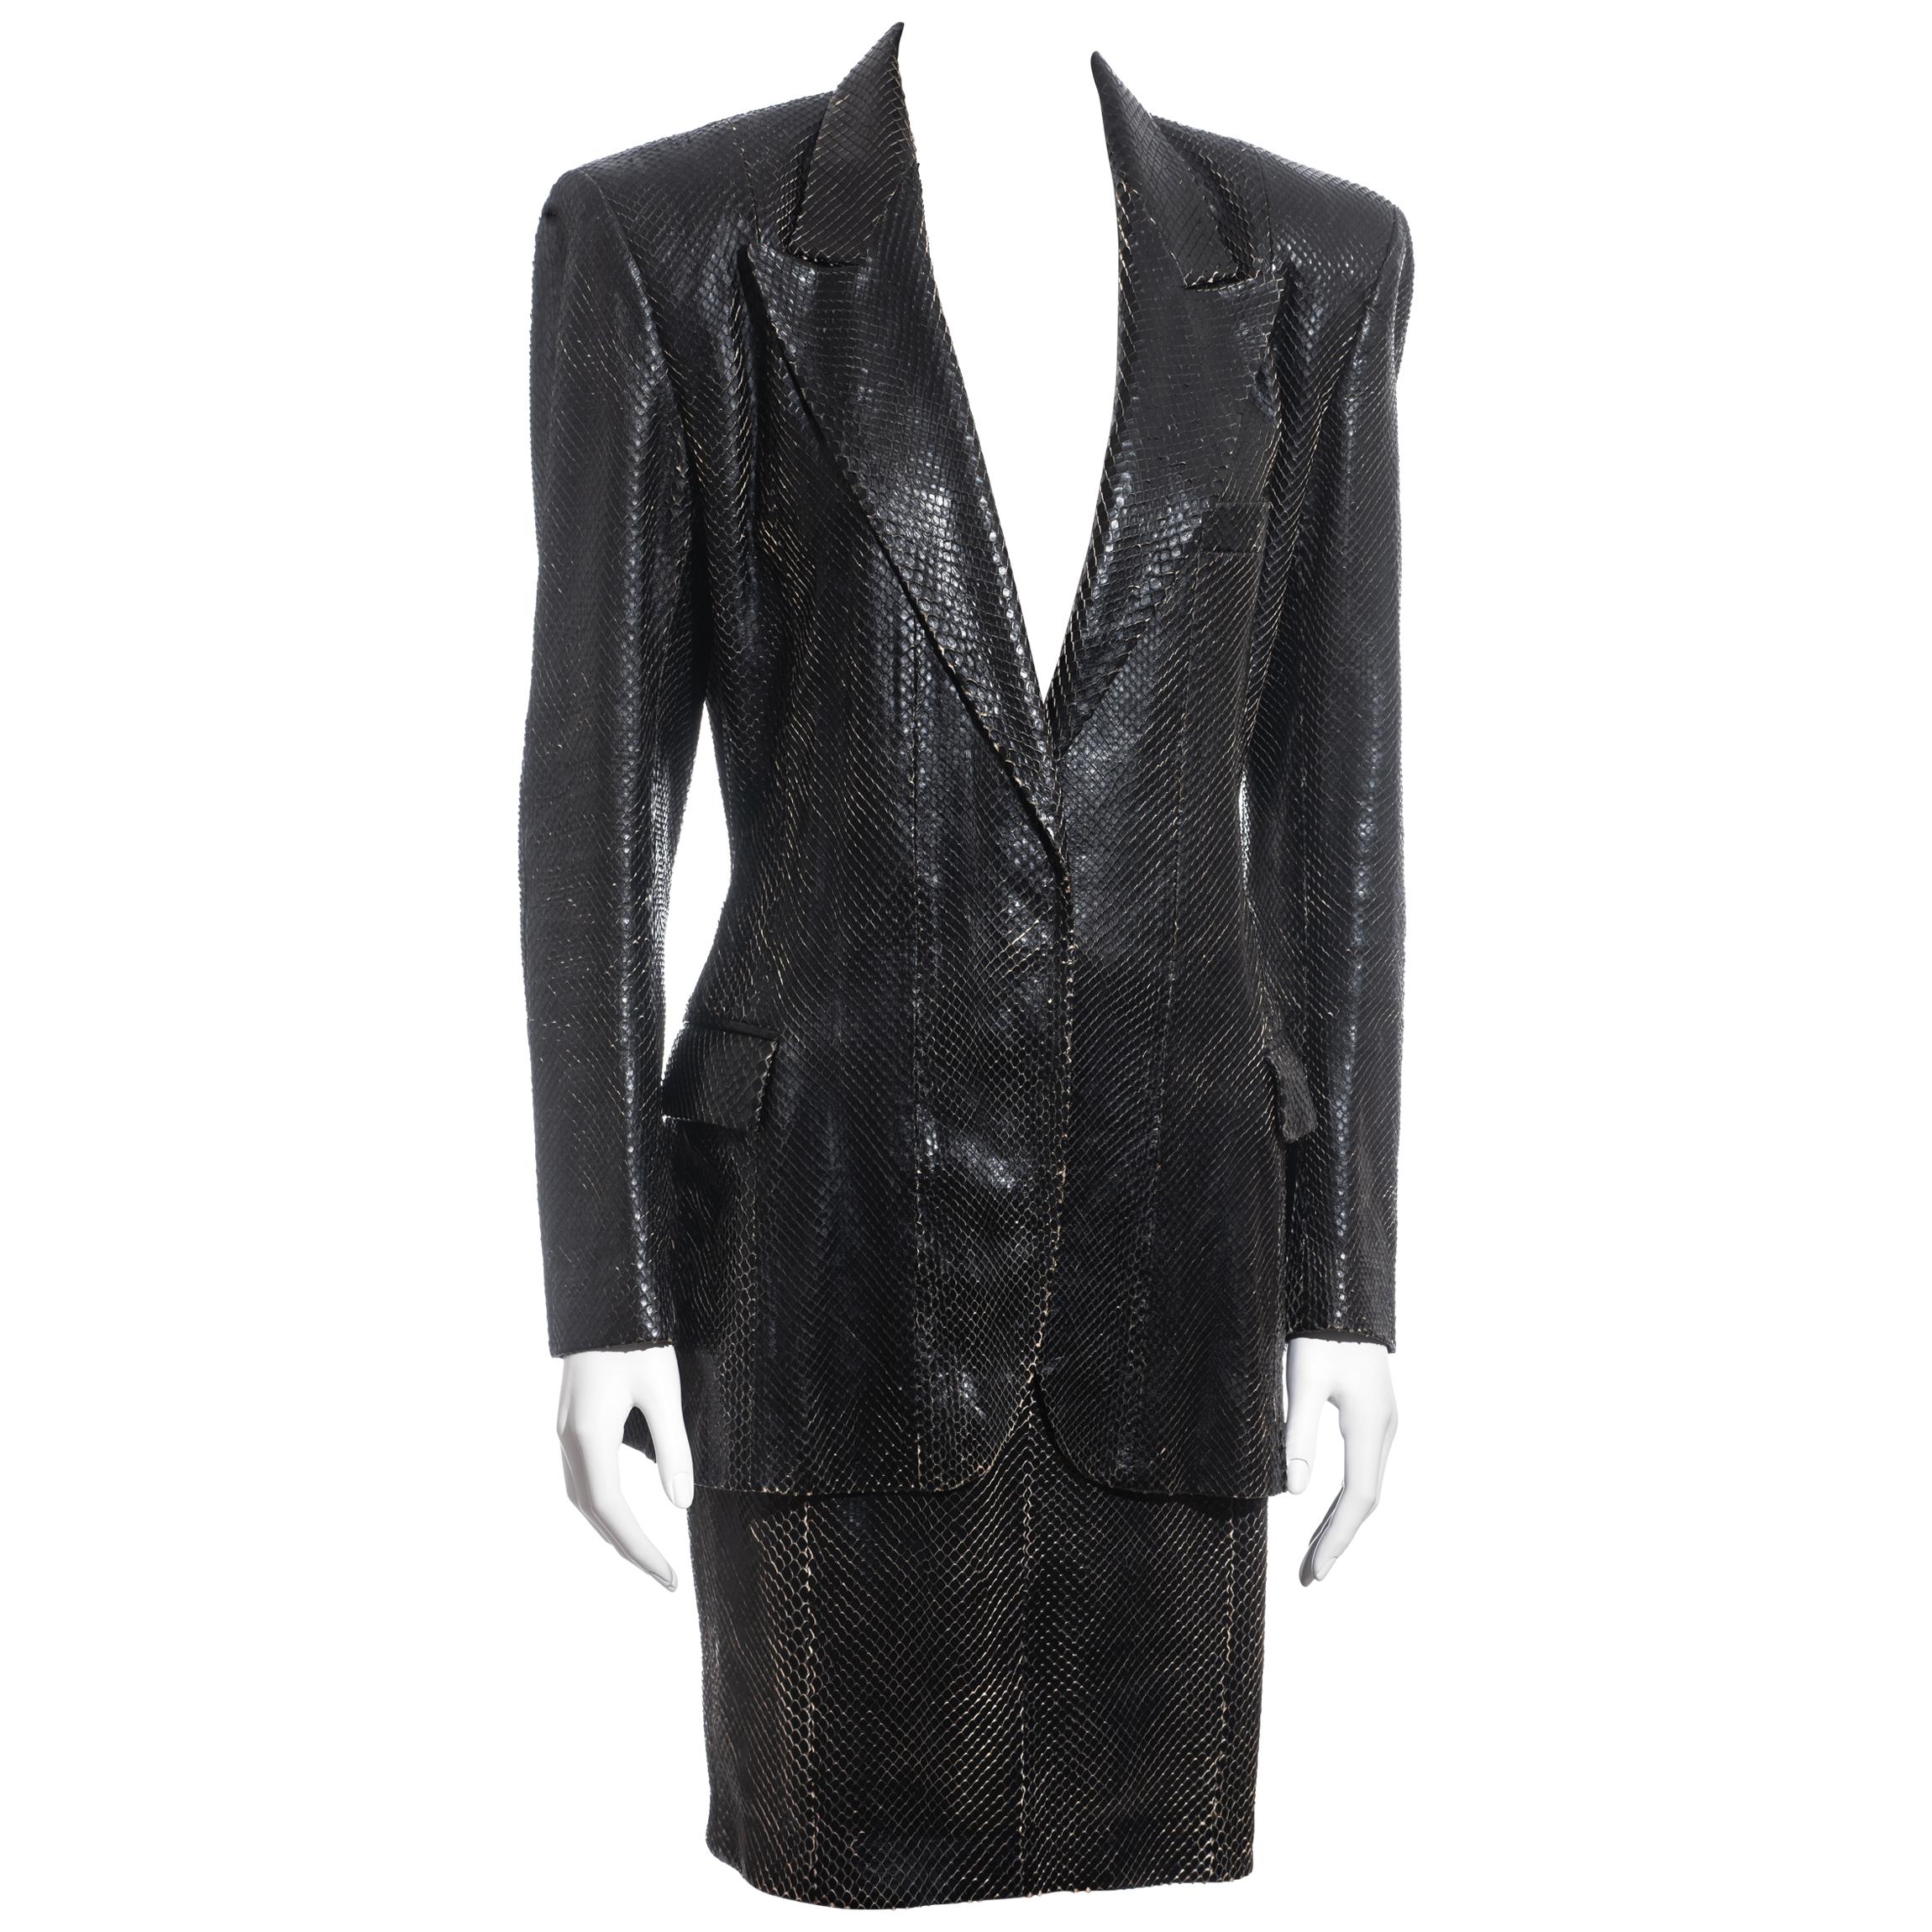 Yves Saint Laurent by Tom Ford black python blazer and skirt suit, ss 2001